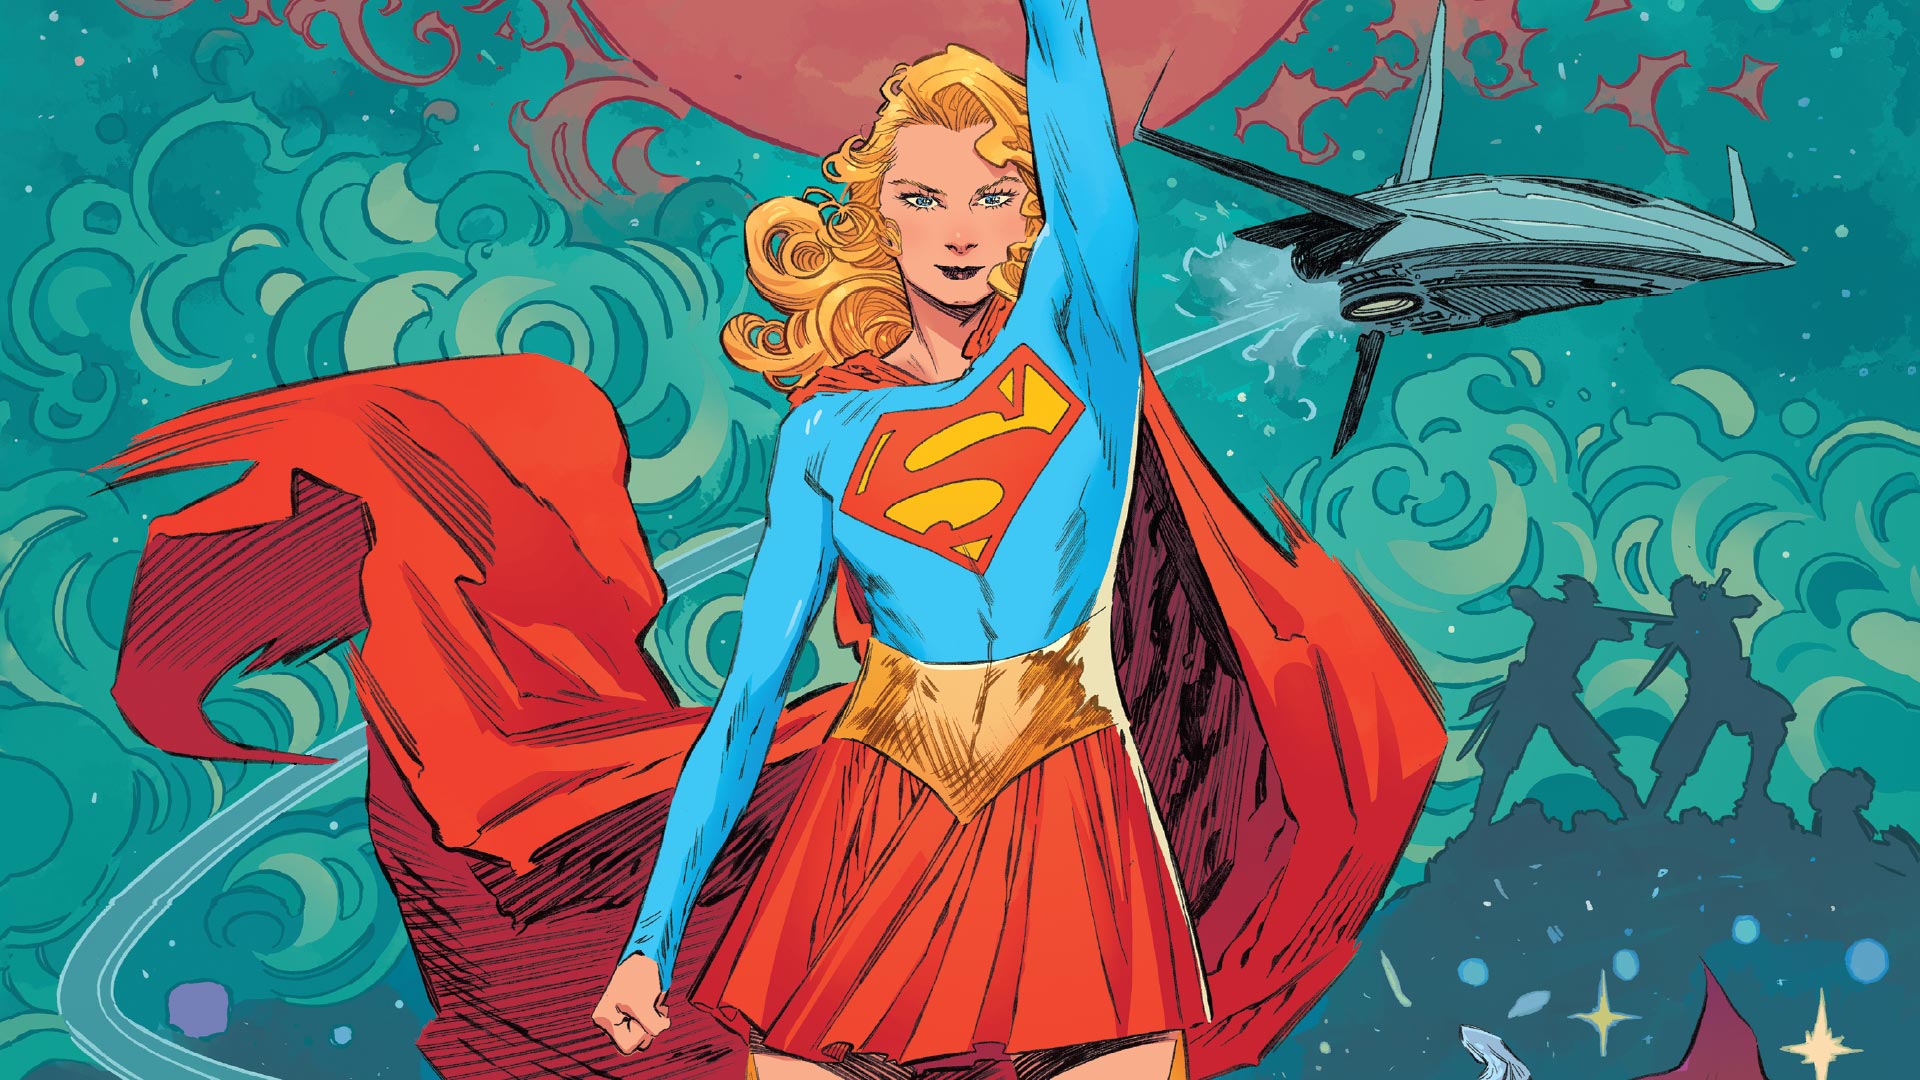 A screenshot of the Supergirl: Girl of The next day graphic new, which shows the titular hero along with her arm raised